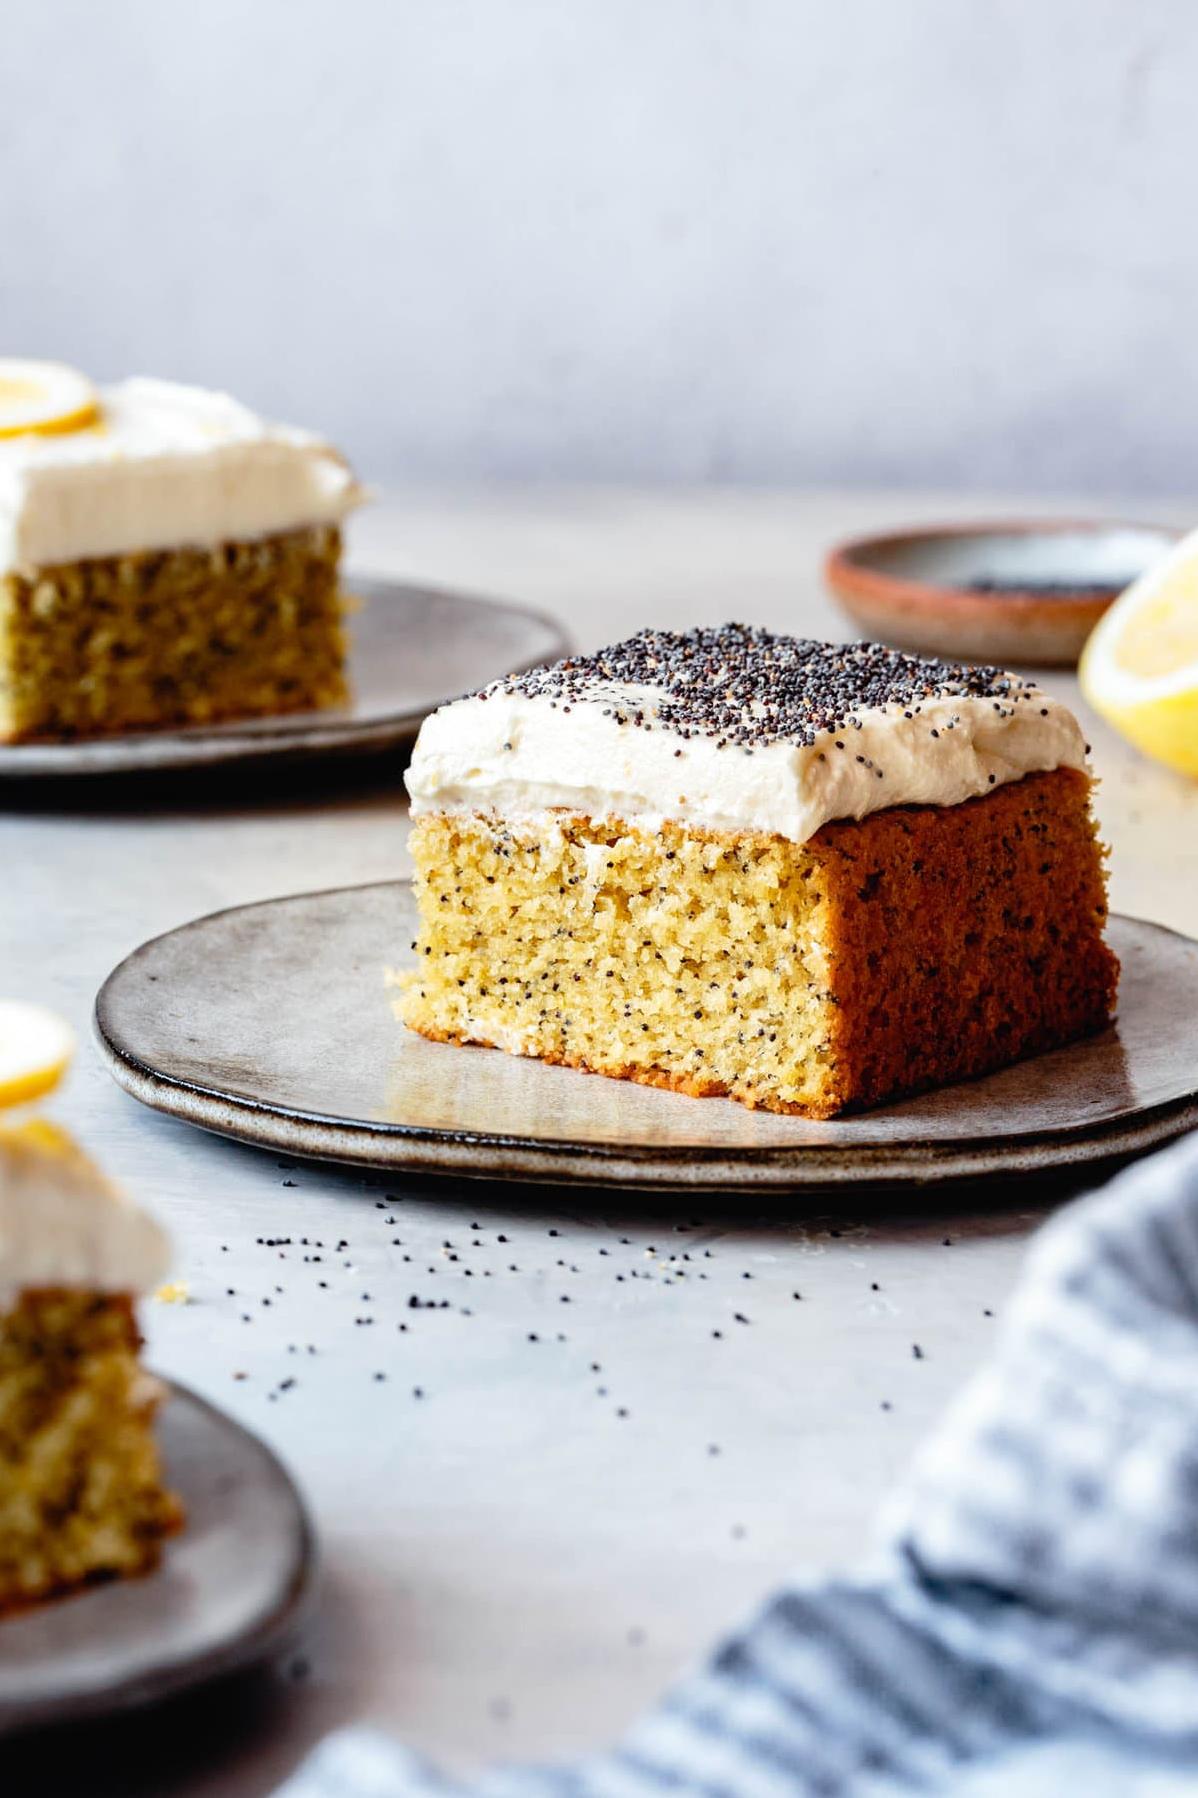  This cake is a refreshing alternative to heavy chocolate cakes